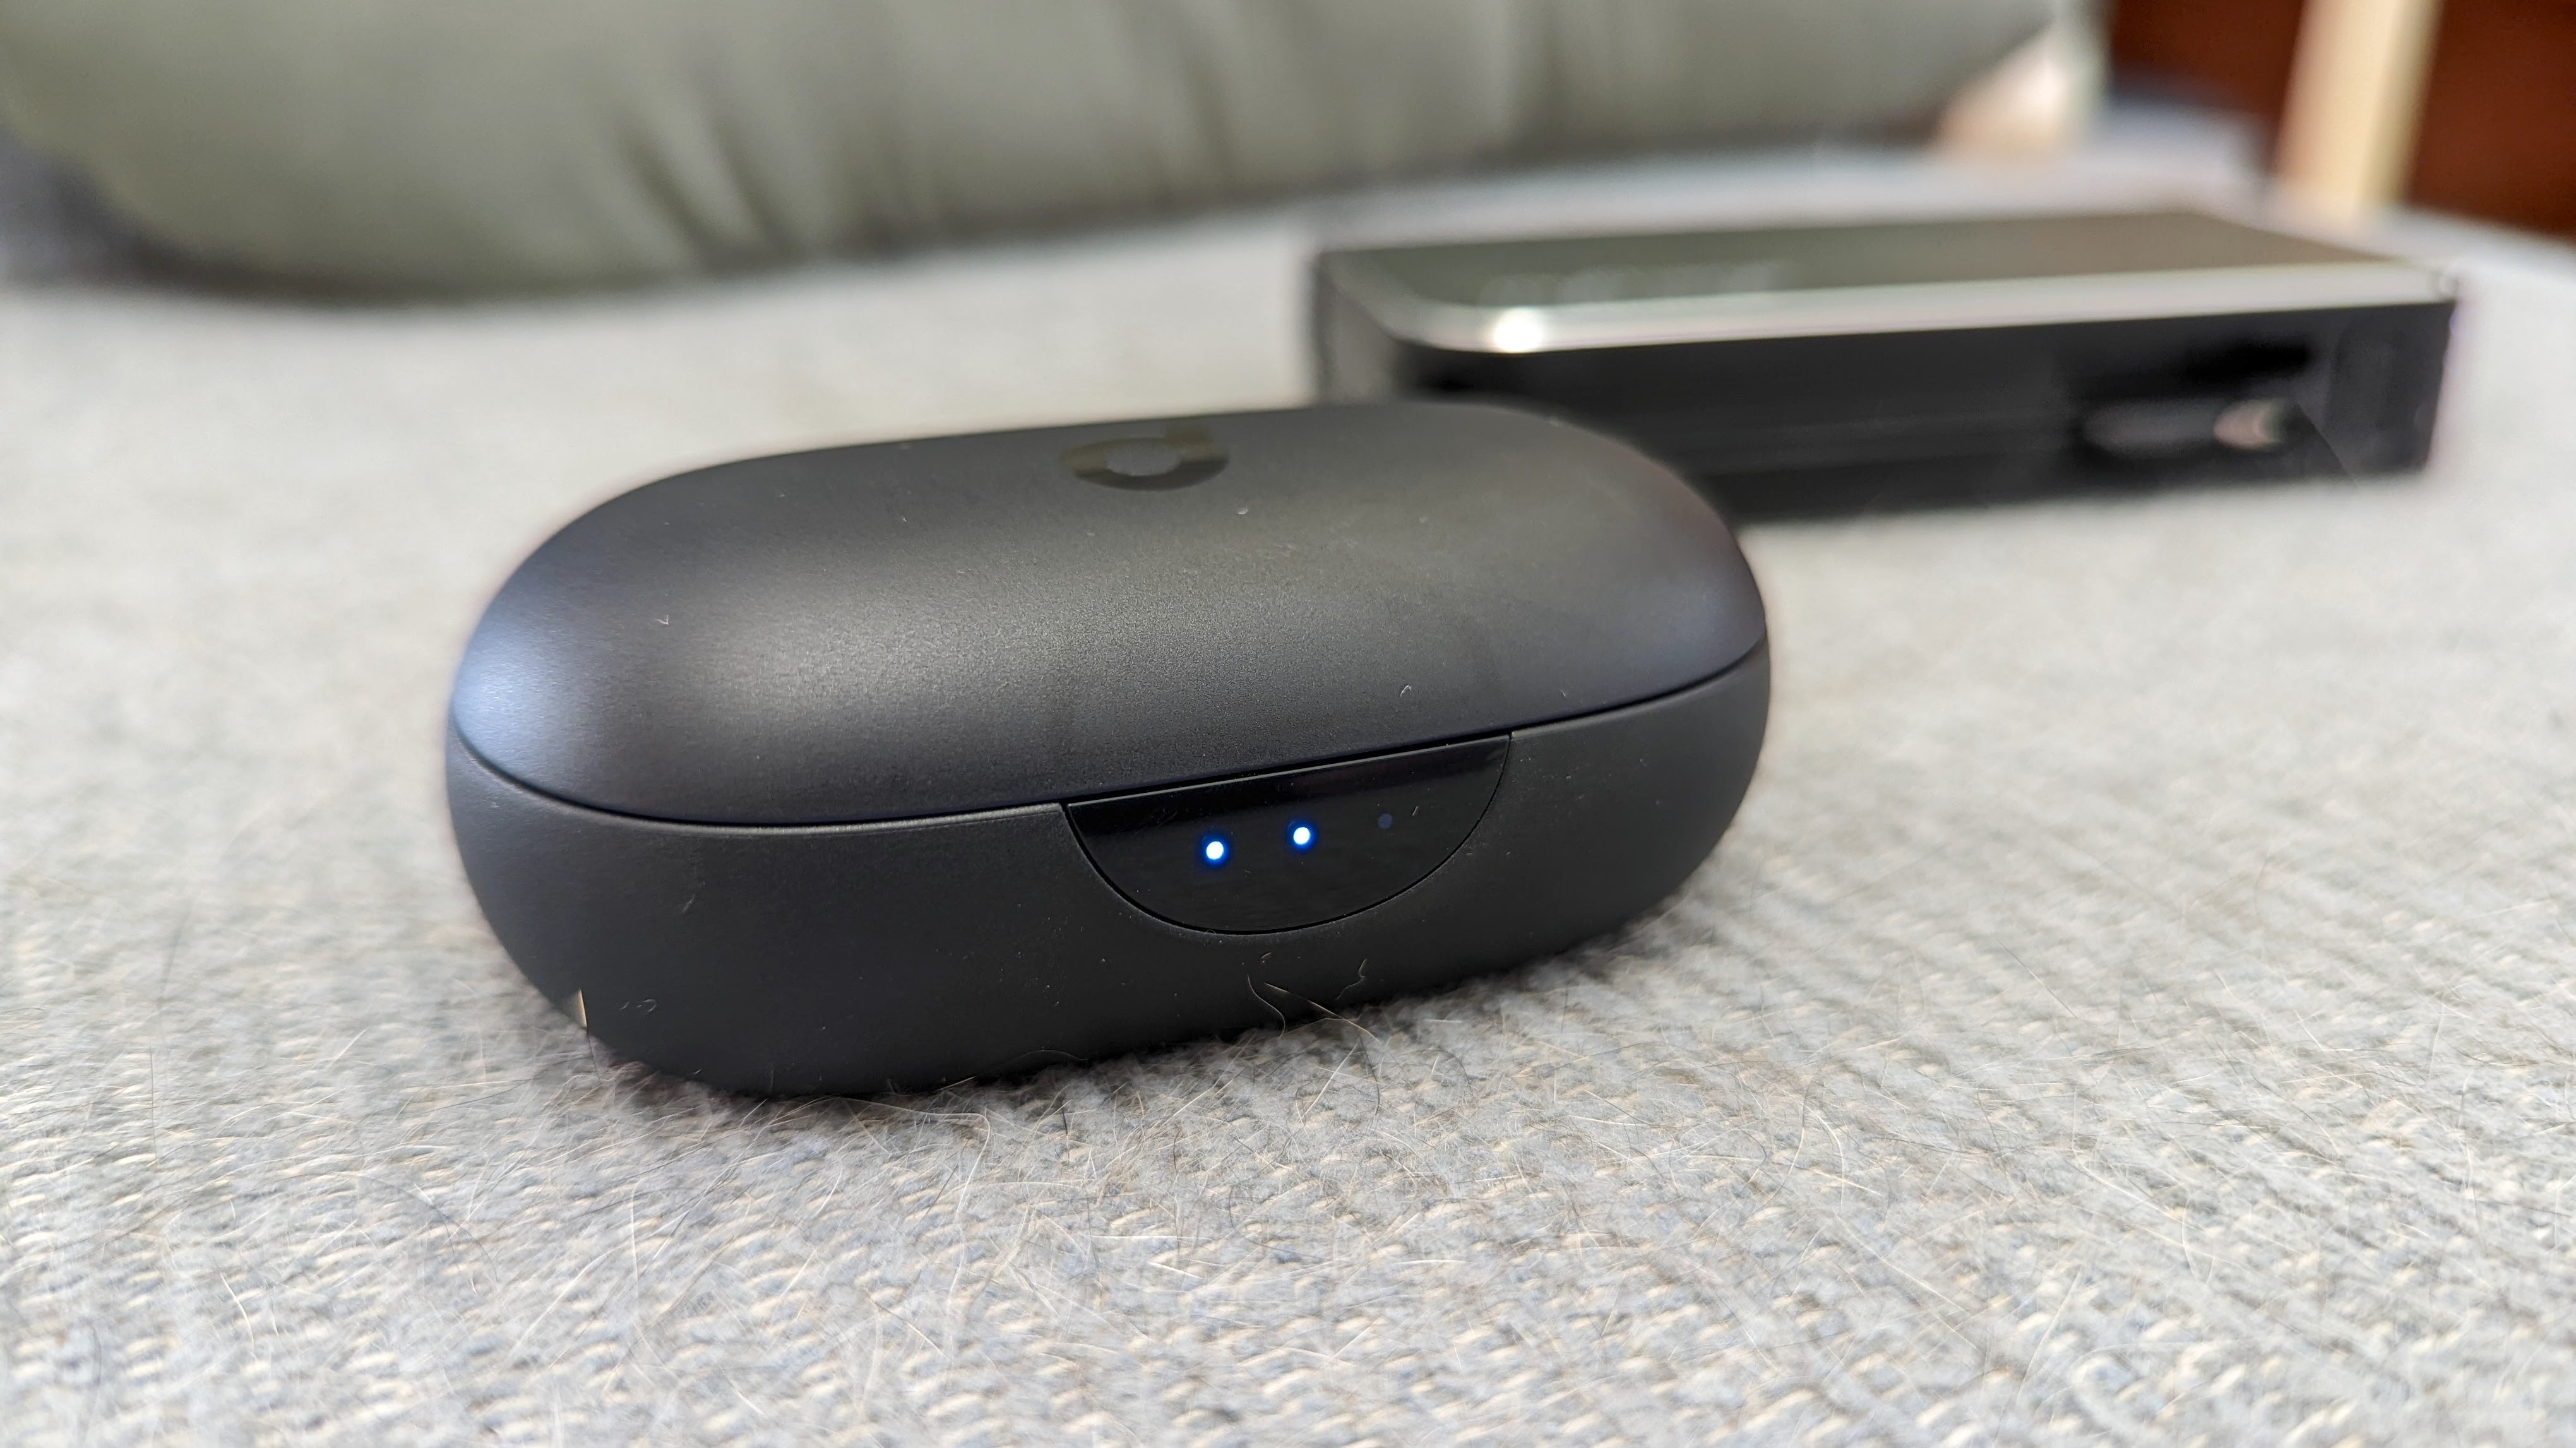 The Anker Soundcore Sport X10 charging case being charged via USB-C cable